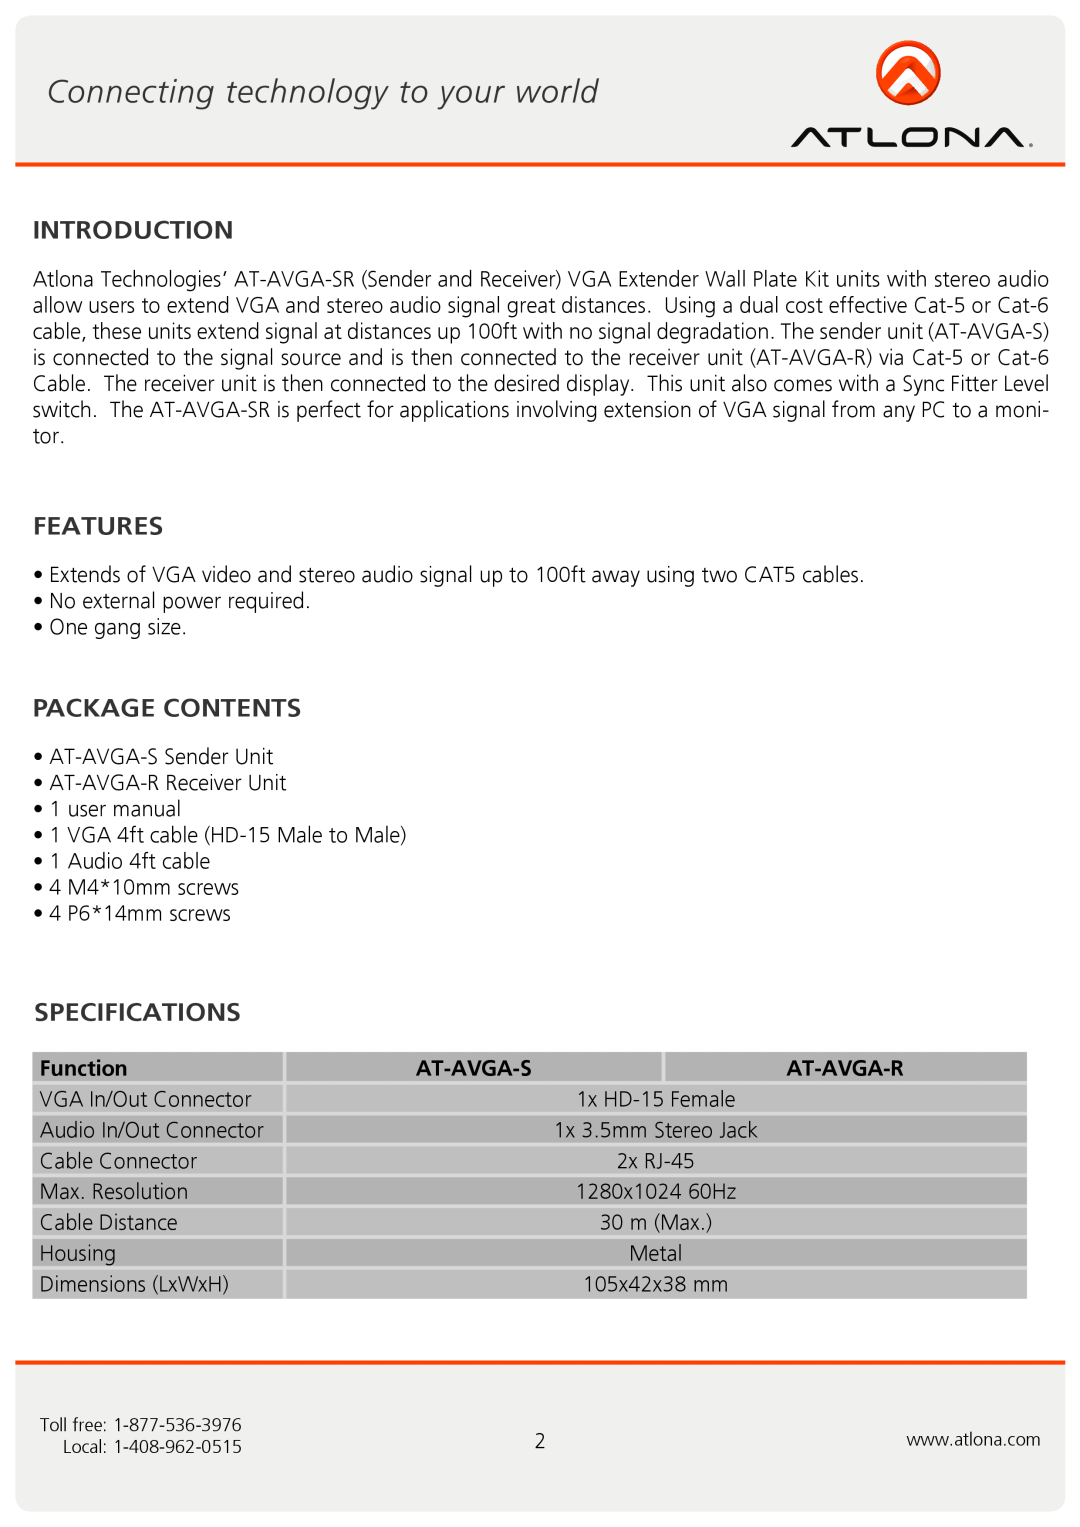 Atlona AT-AVGA-SR user manual Introduction, Features, Package Contents, Specifications, Function, At-Avga-S, At-Avga-R 